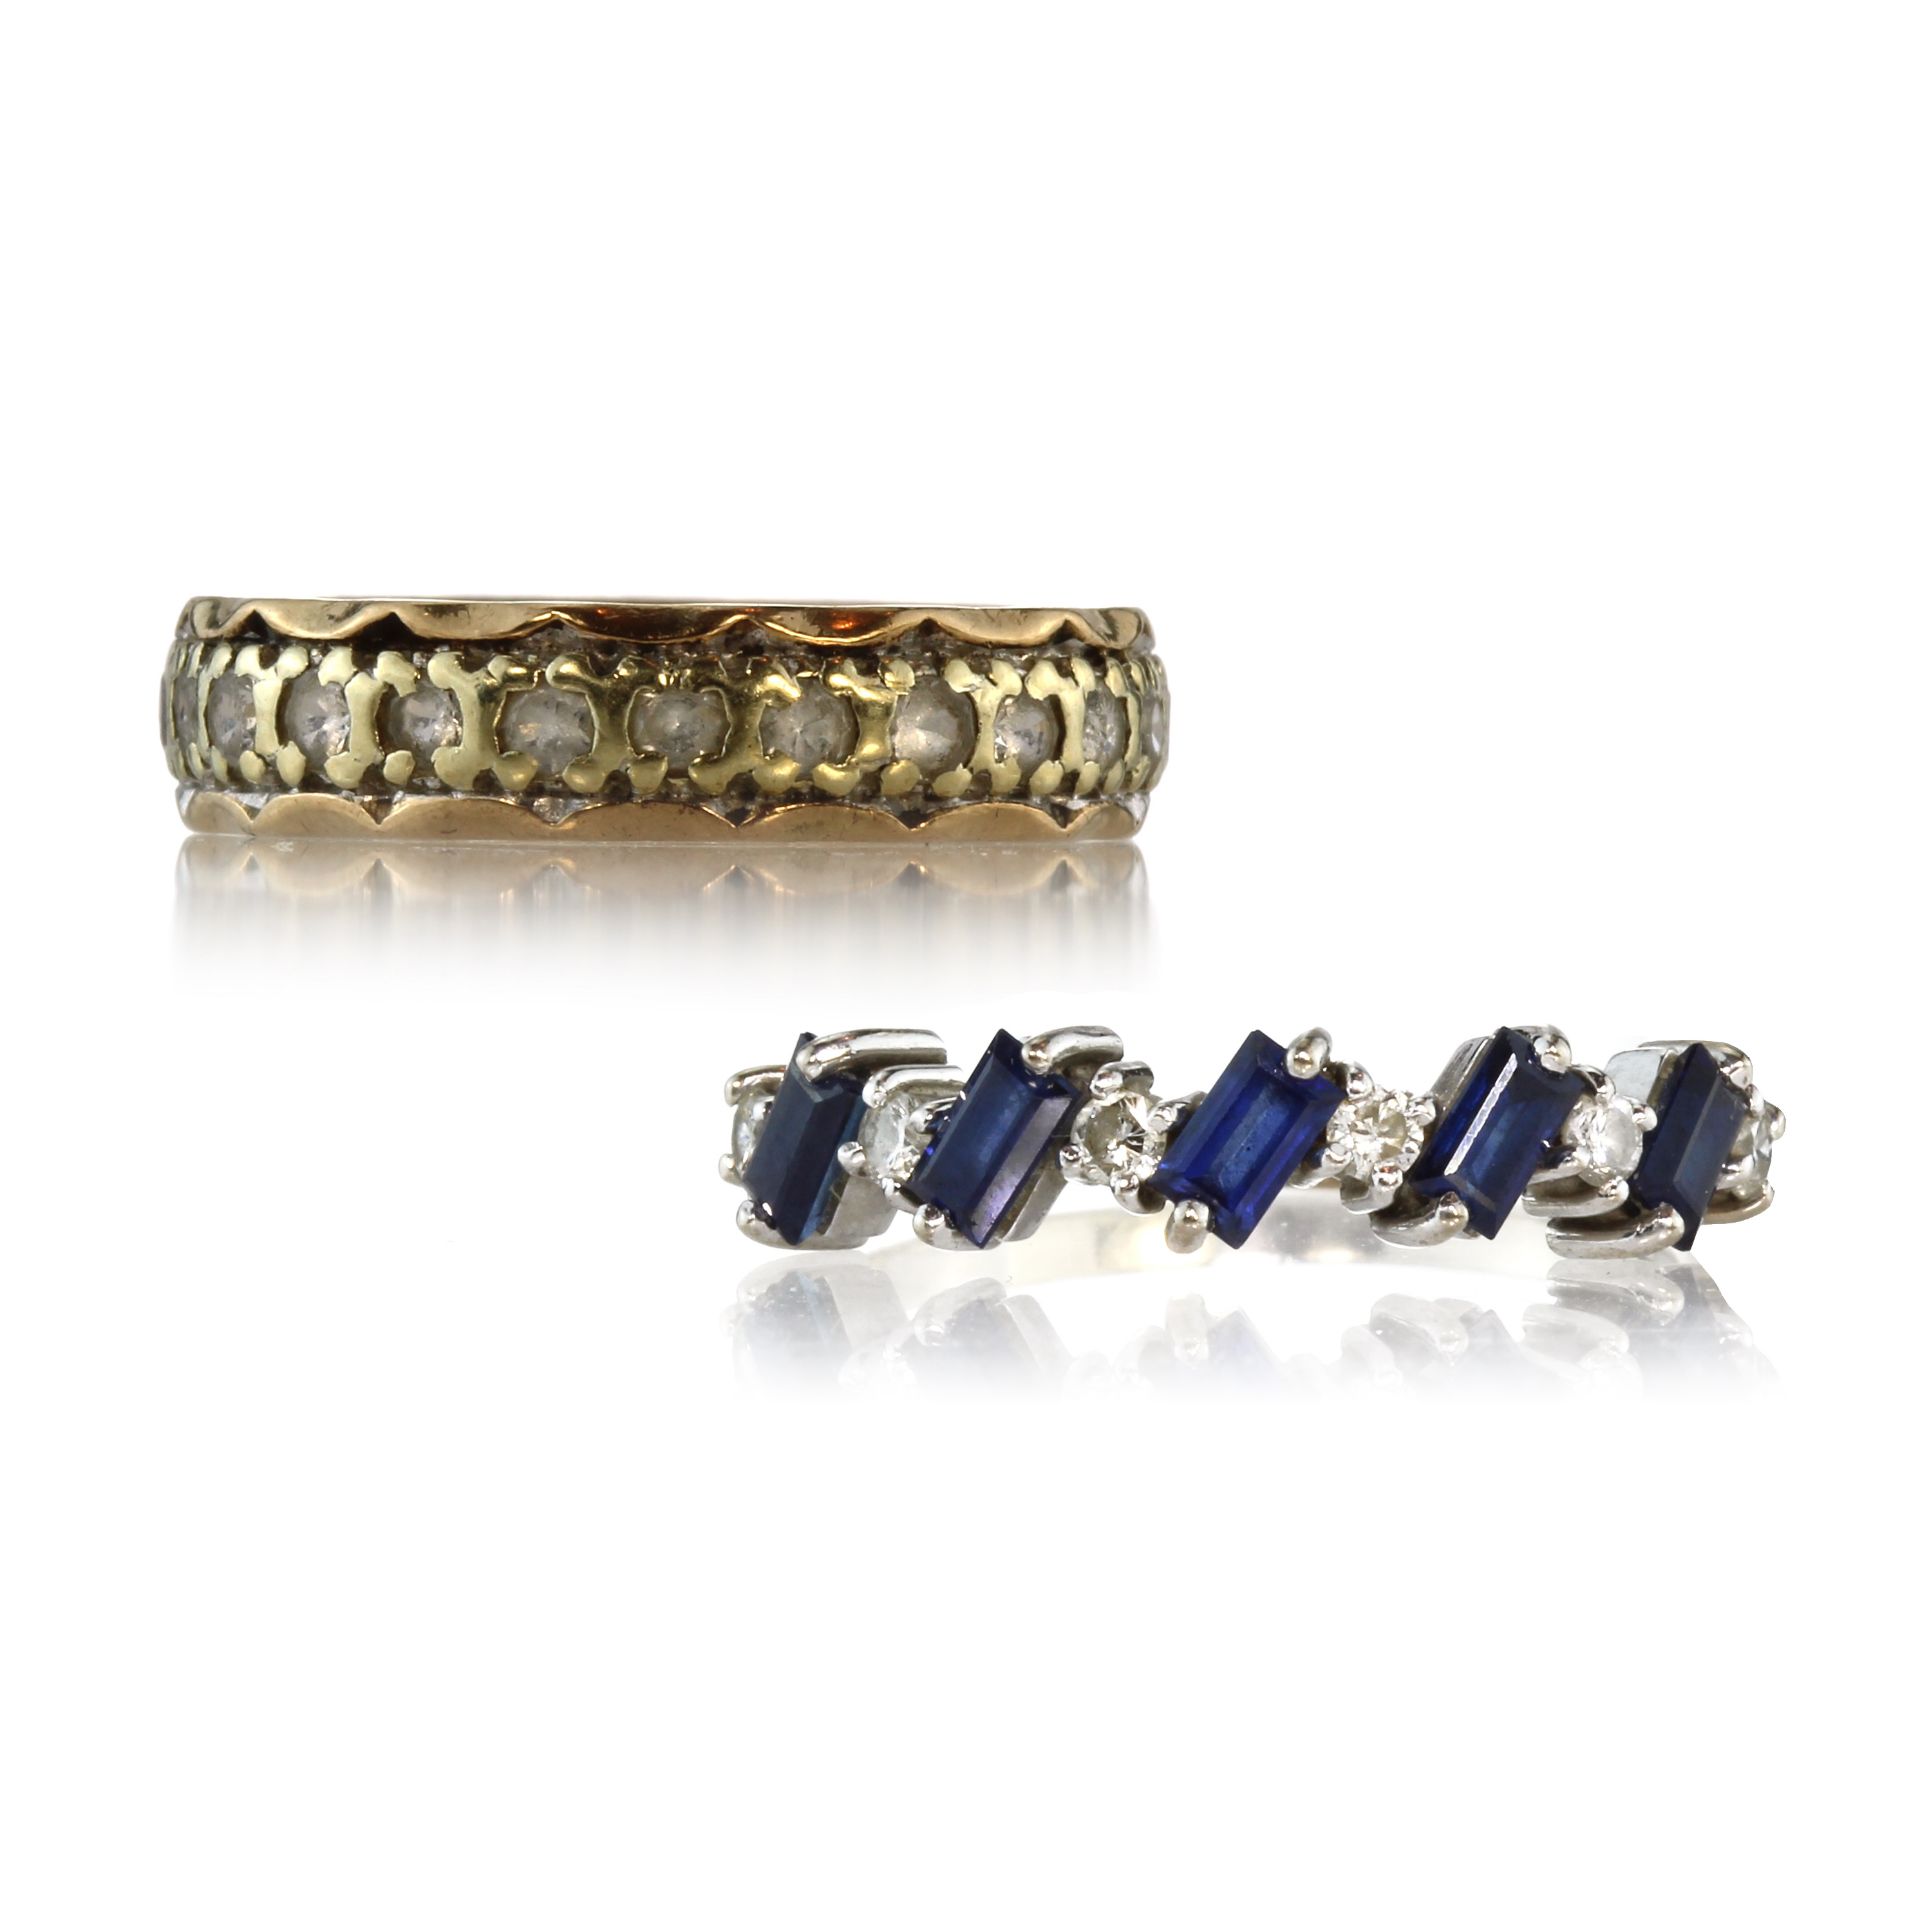 A sapphire and diamond dress ring in 18ct white gold set with a single row of alternating round